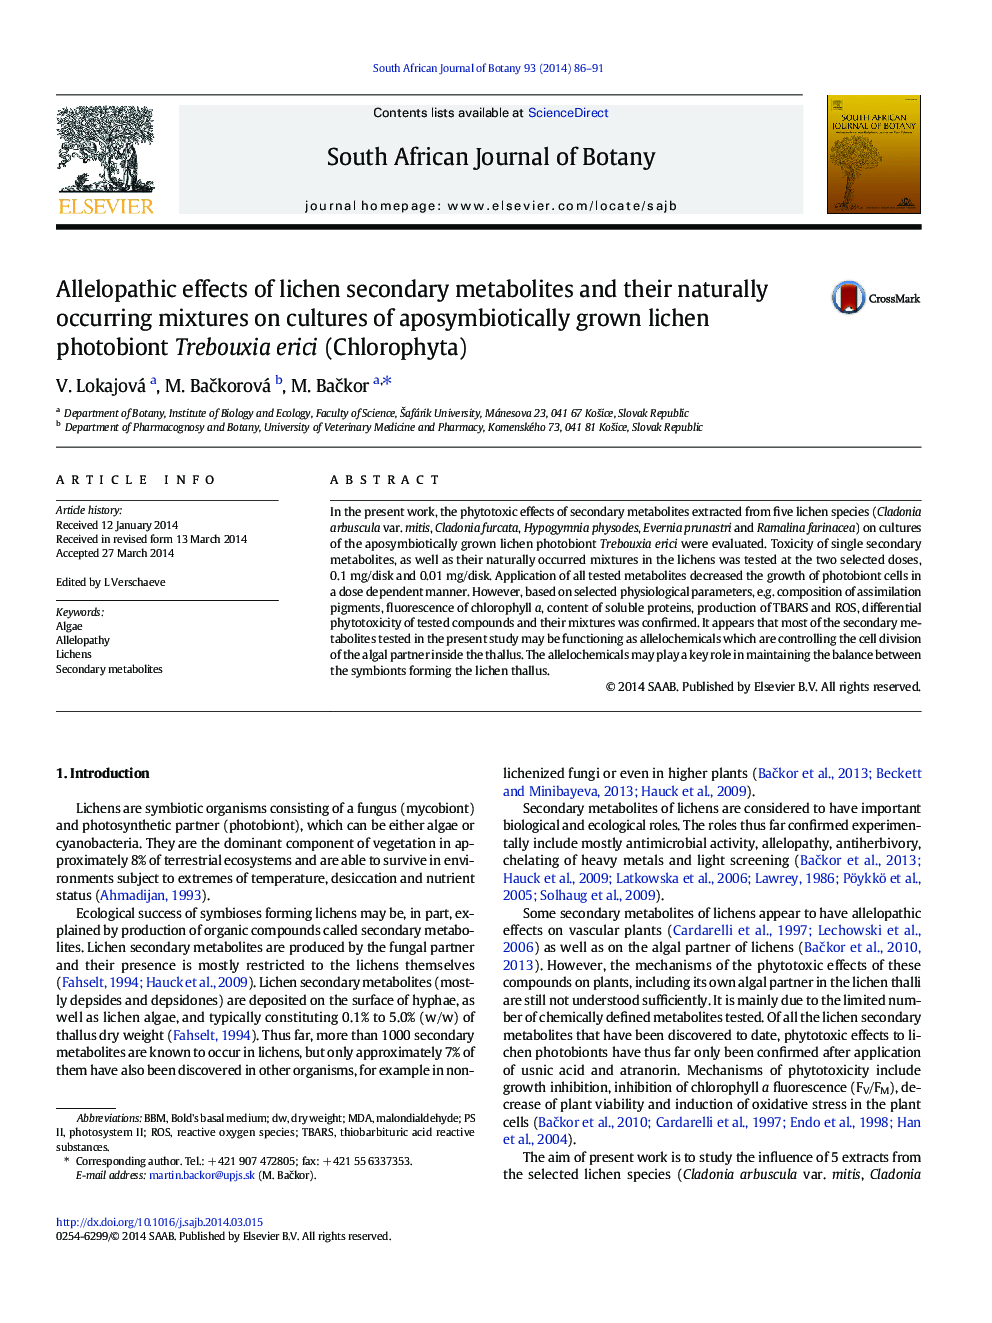 Allelopathic effects of lichen secondary metabolites and their naturally occurring mixtures on cultures of aposymbiotically grown lichen photobiont Trebouxia erici (Chlorophyta)